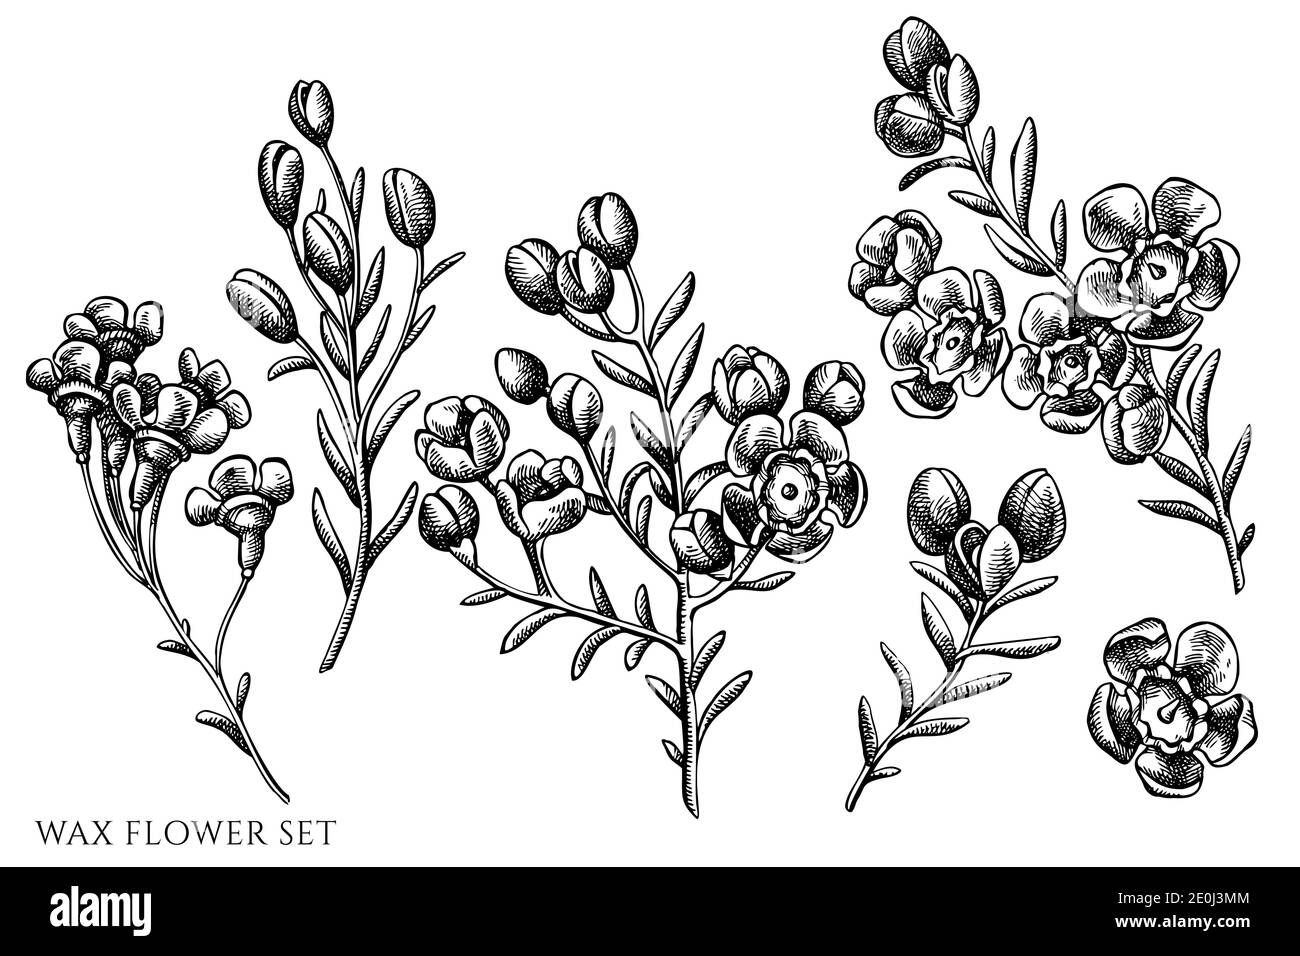 Vector set of hand drawn black and white wax flower Stock Vector Image ...